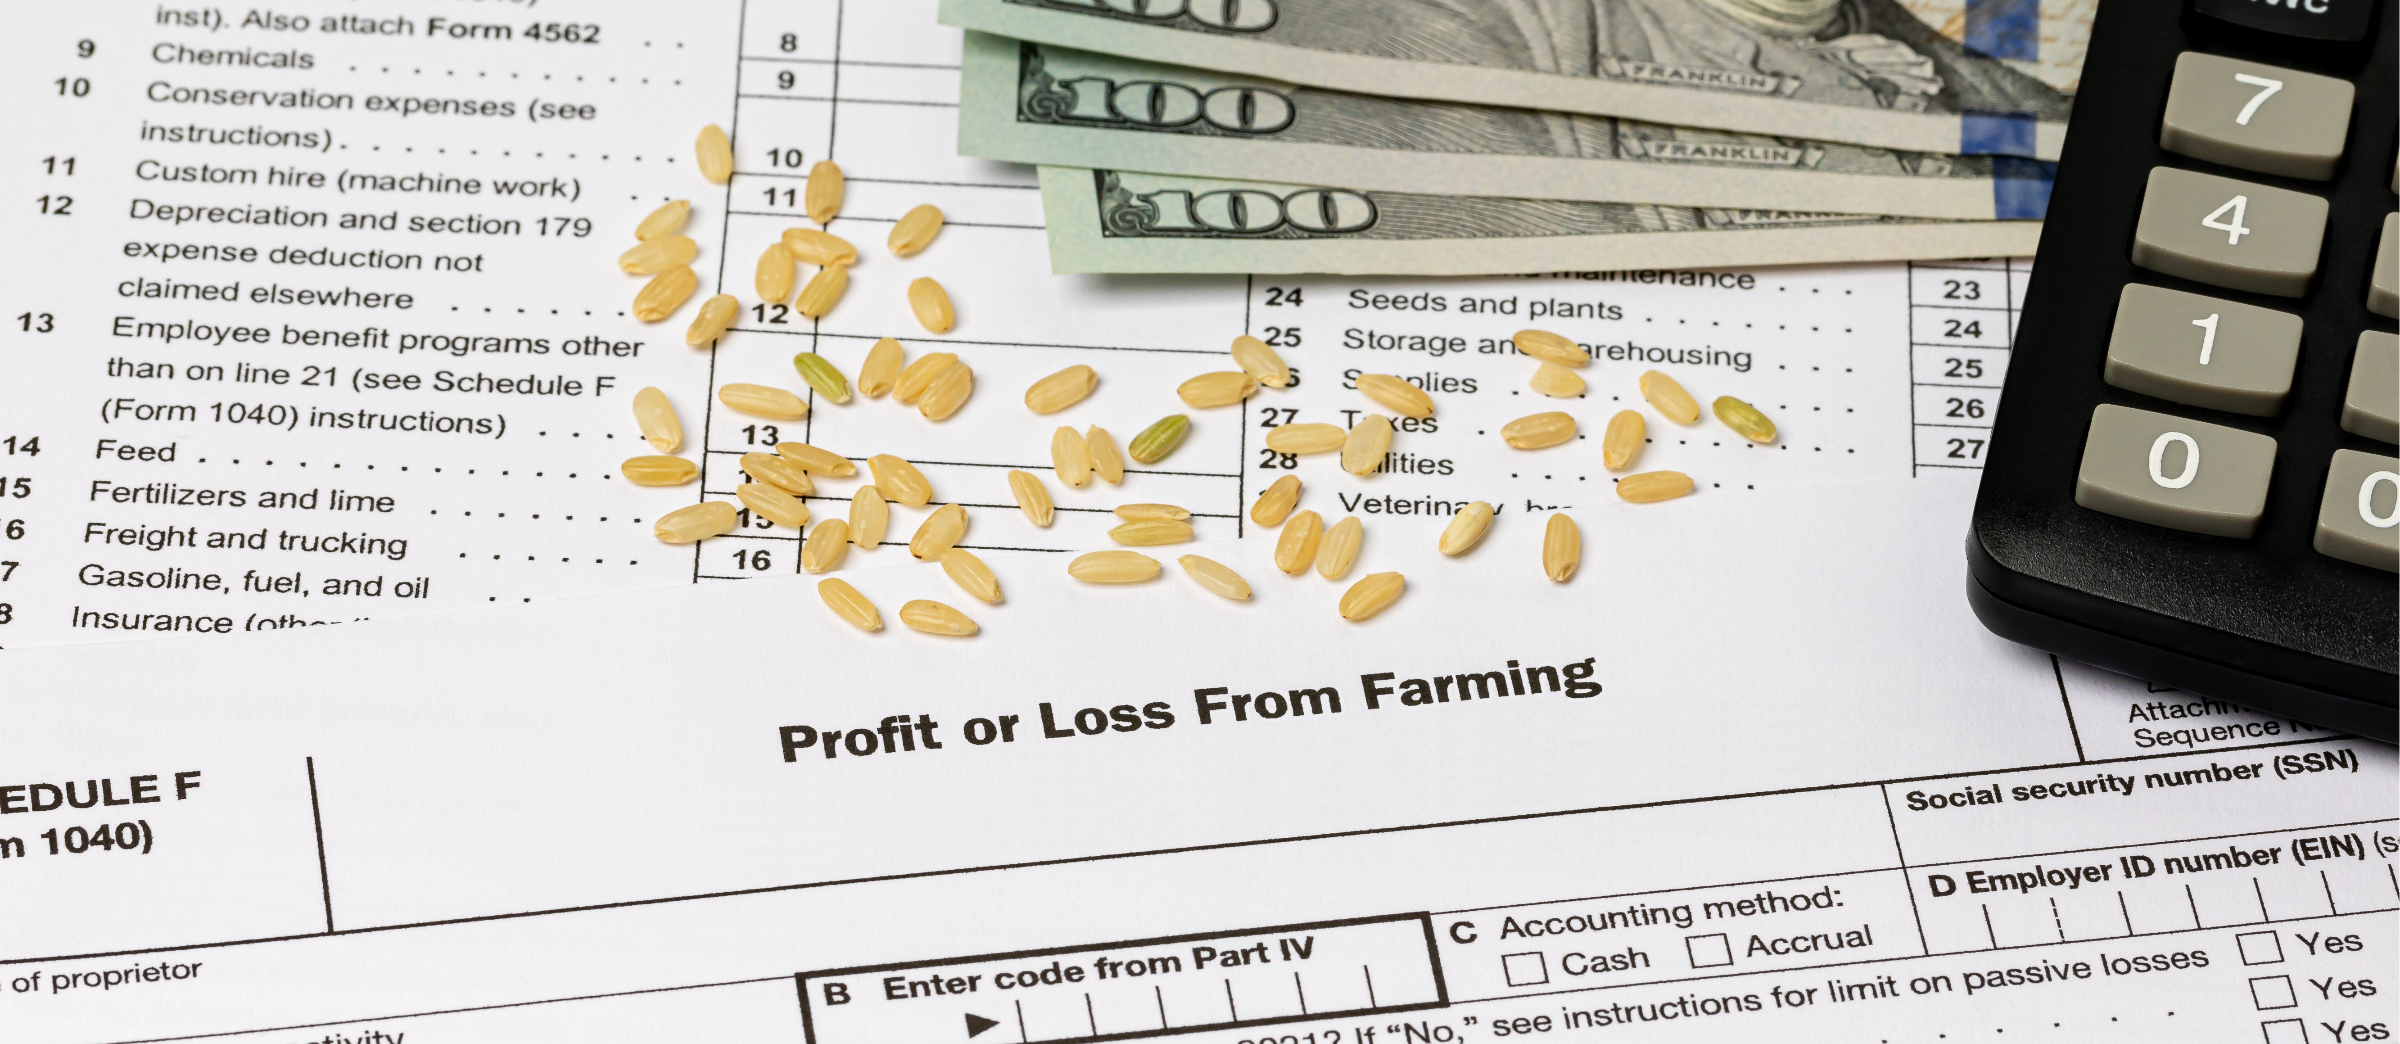 Profit or Loss From Farming Schedule F paperwork, small grains, calculator, and cash together